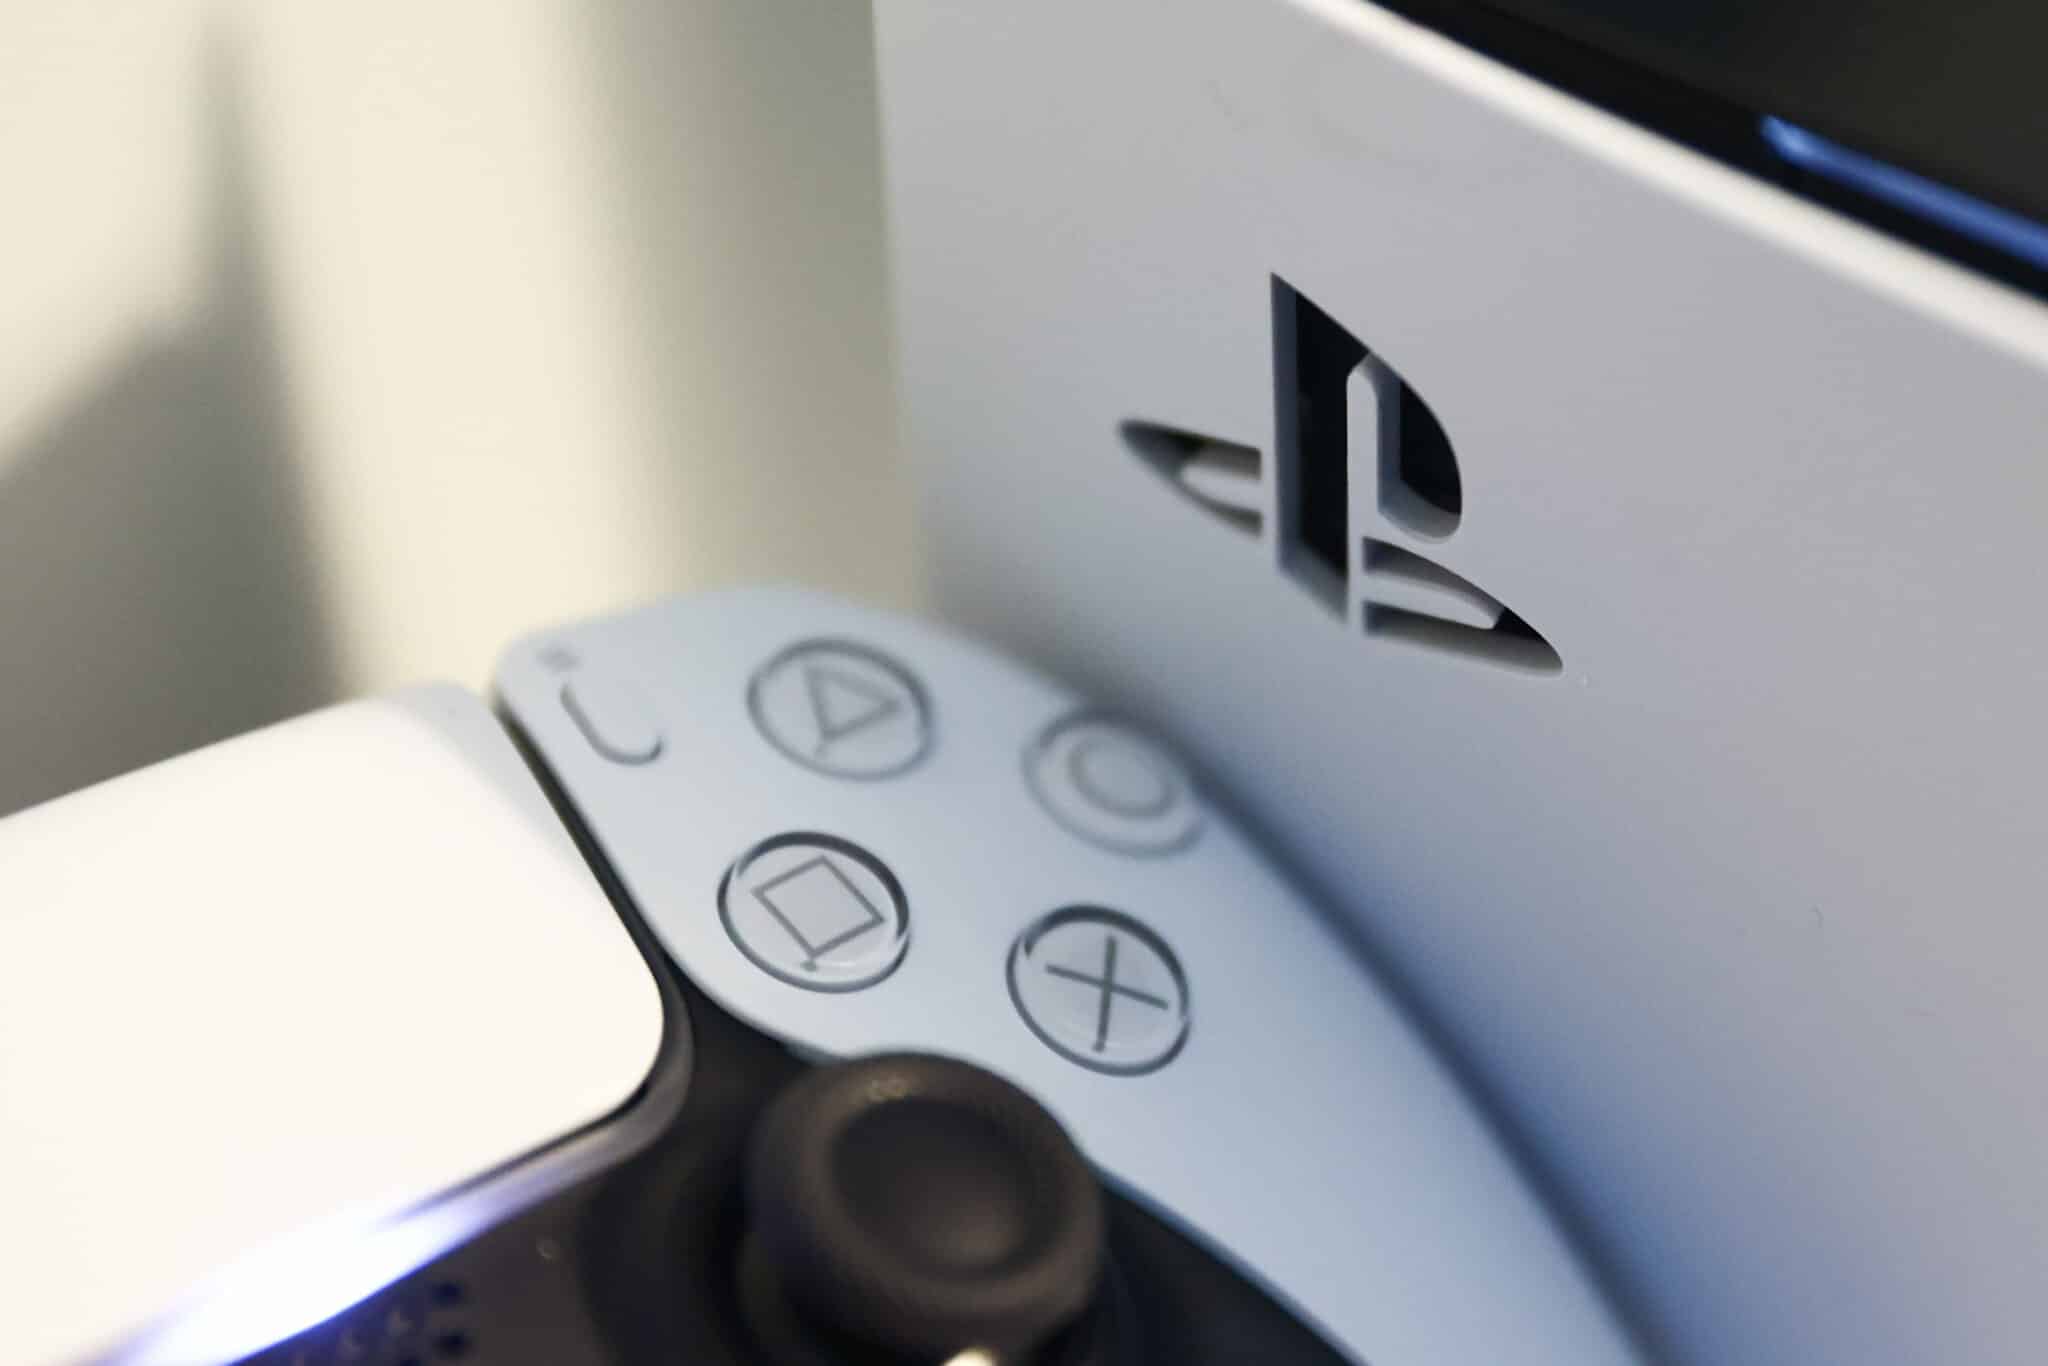 Sony is making a bold bet on an African gaming startup to boost PlayStation’s reach in the continent